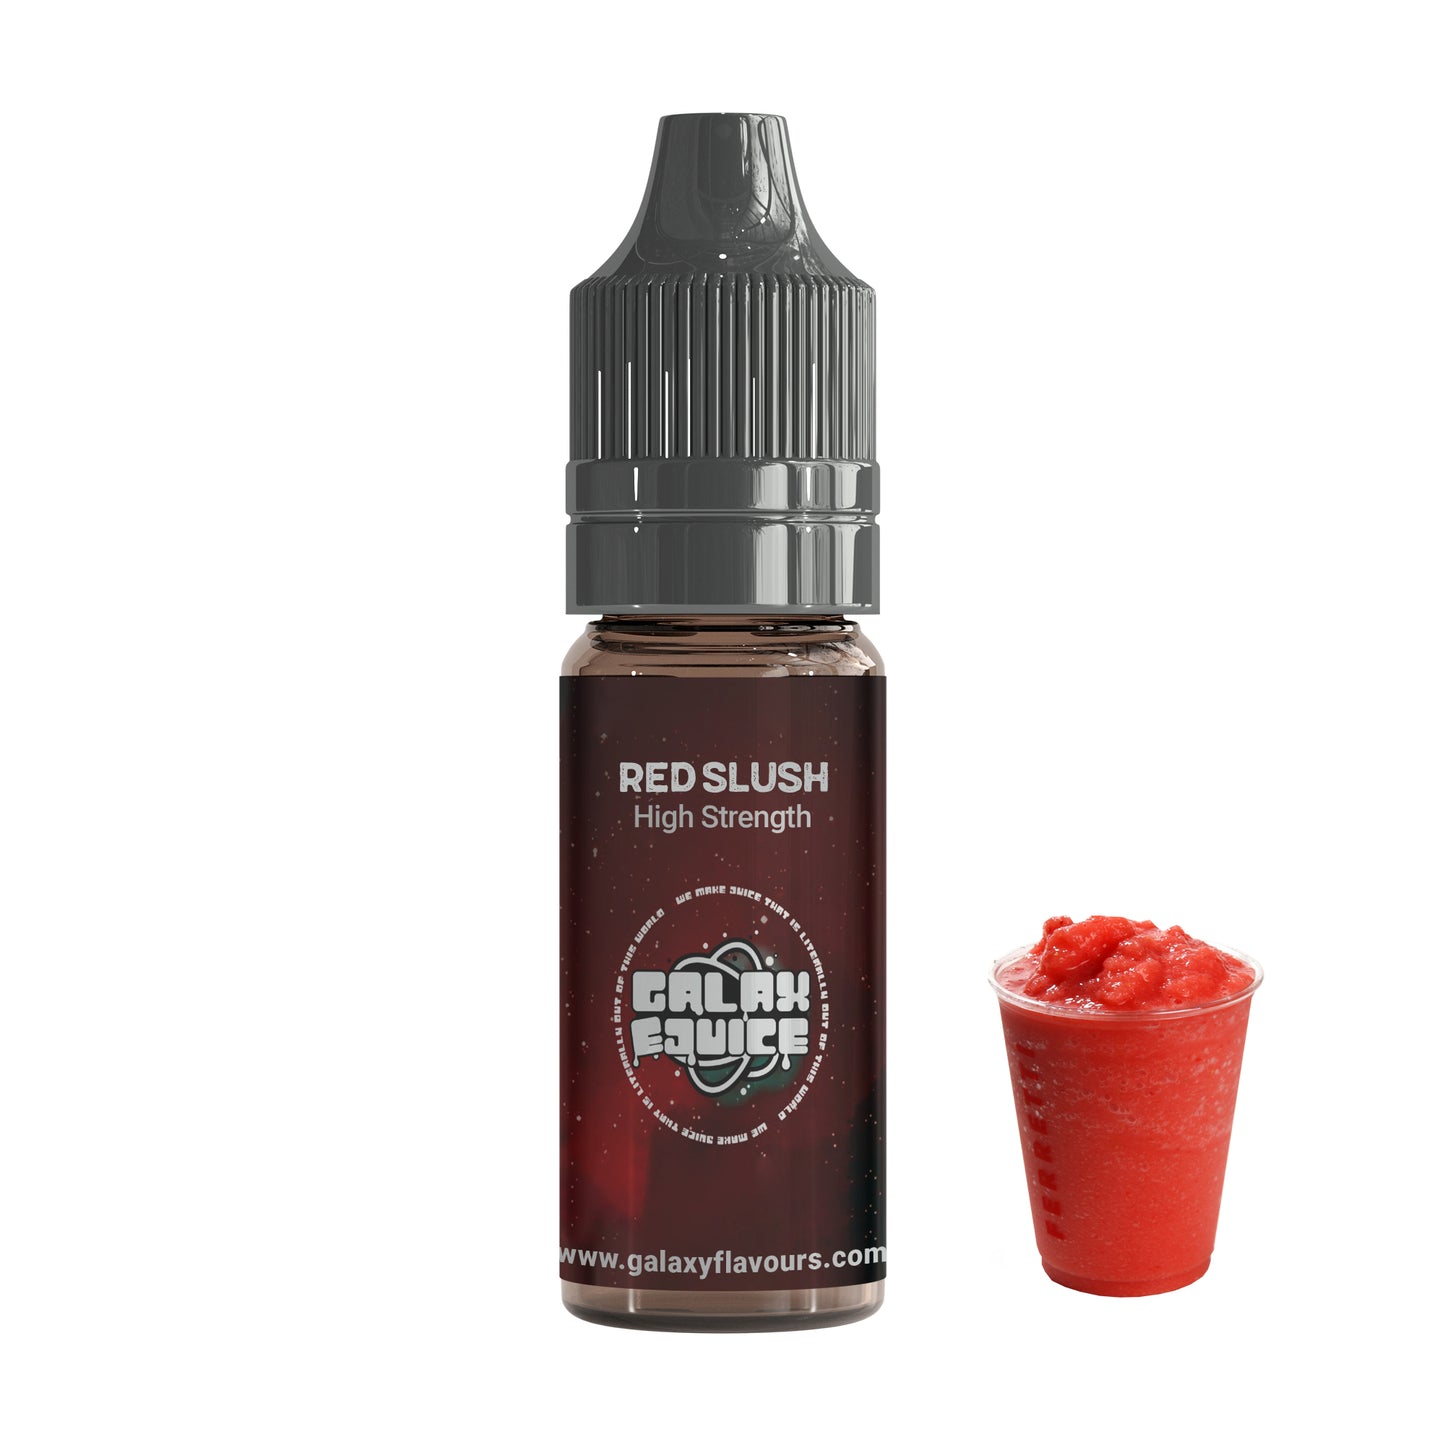 Red Slush High Strength Professional Flavouring.